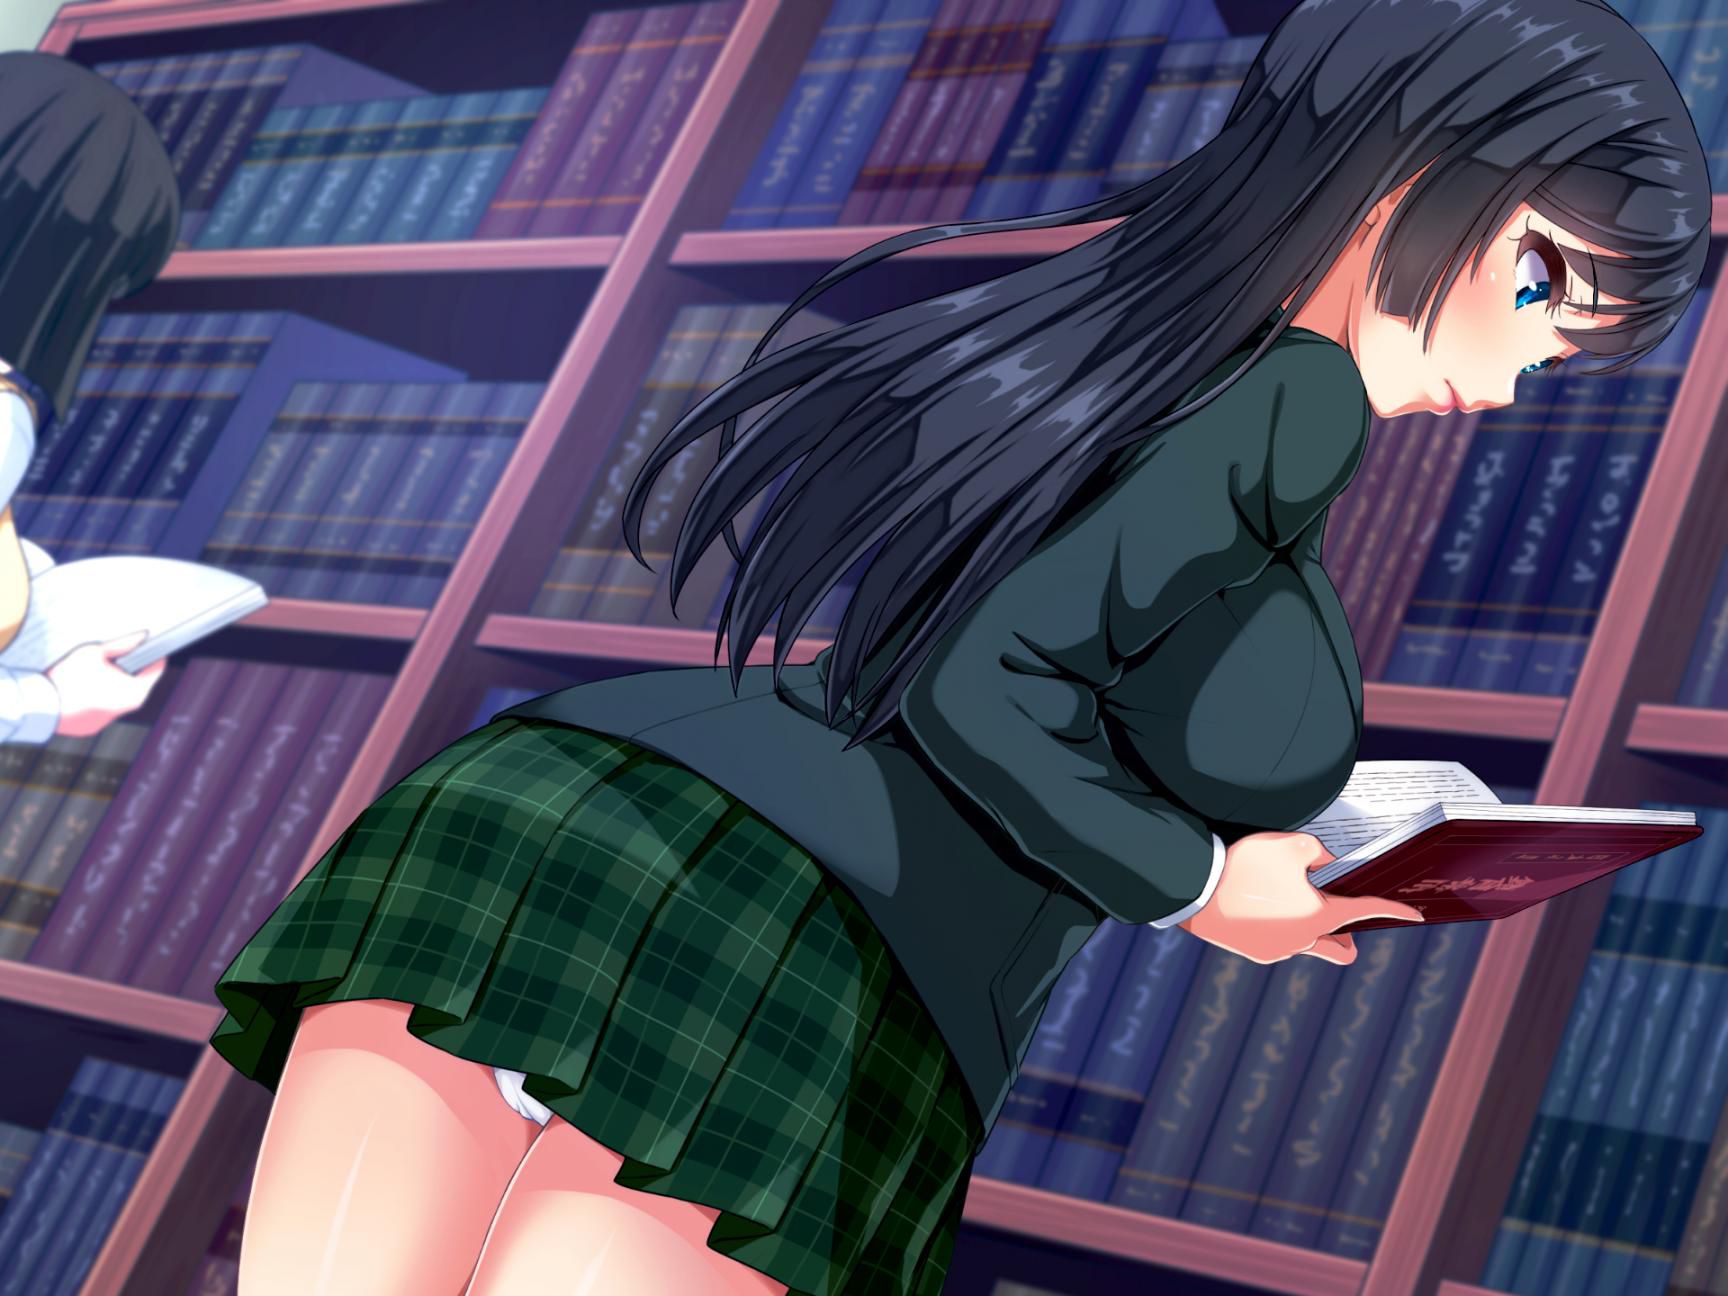 Erotic anime summary Panchira of beautiful girls who seem not to be able to hide erections when seen in the city and school [secondary erotic] 20